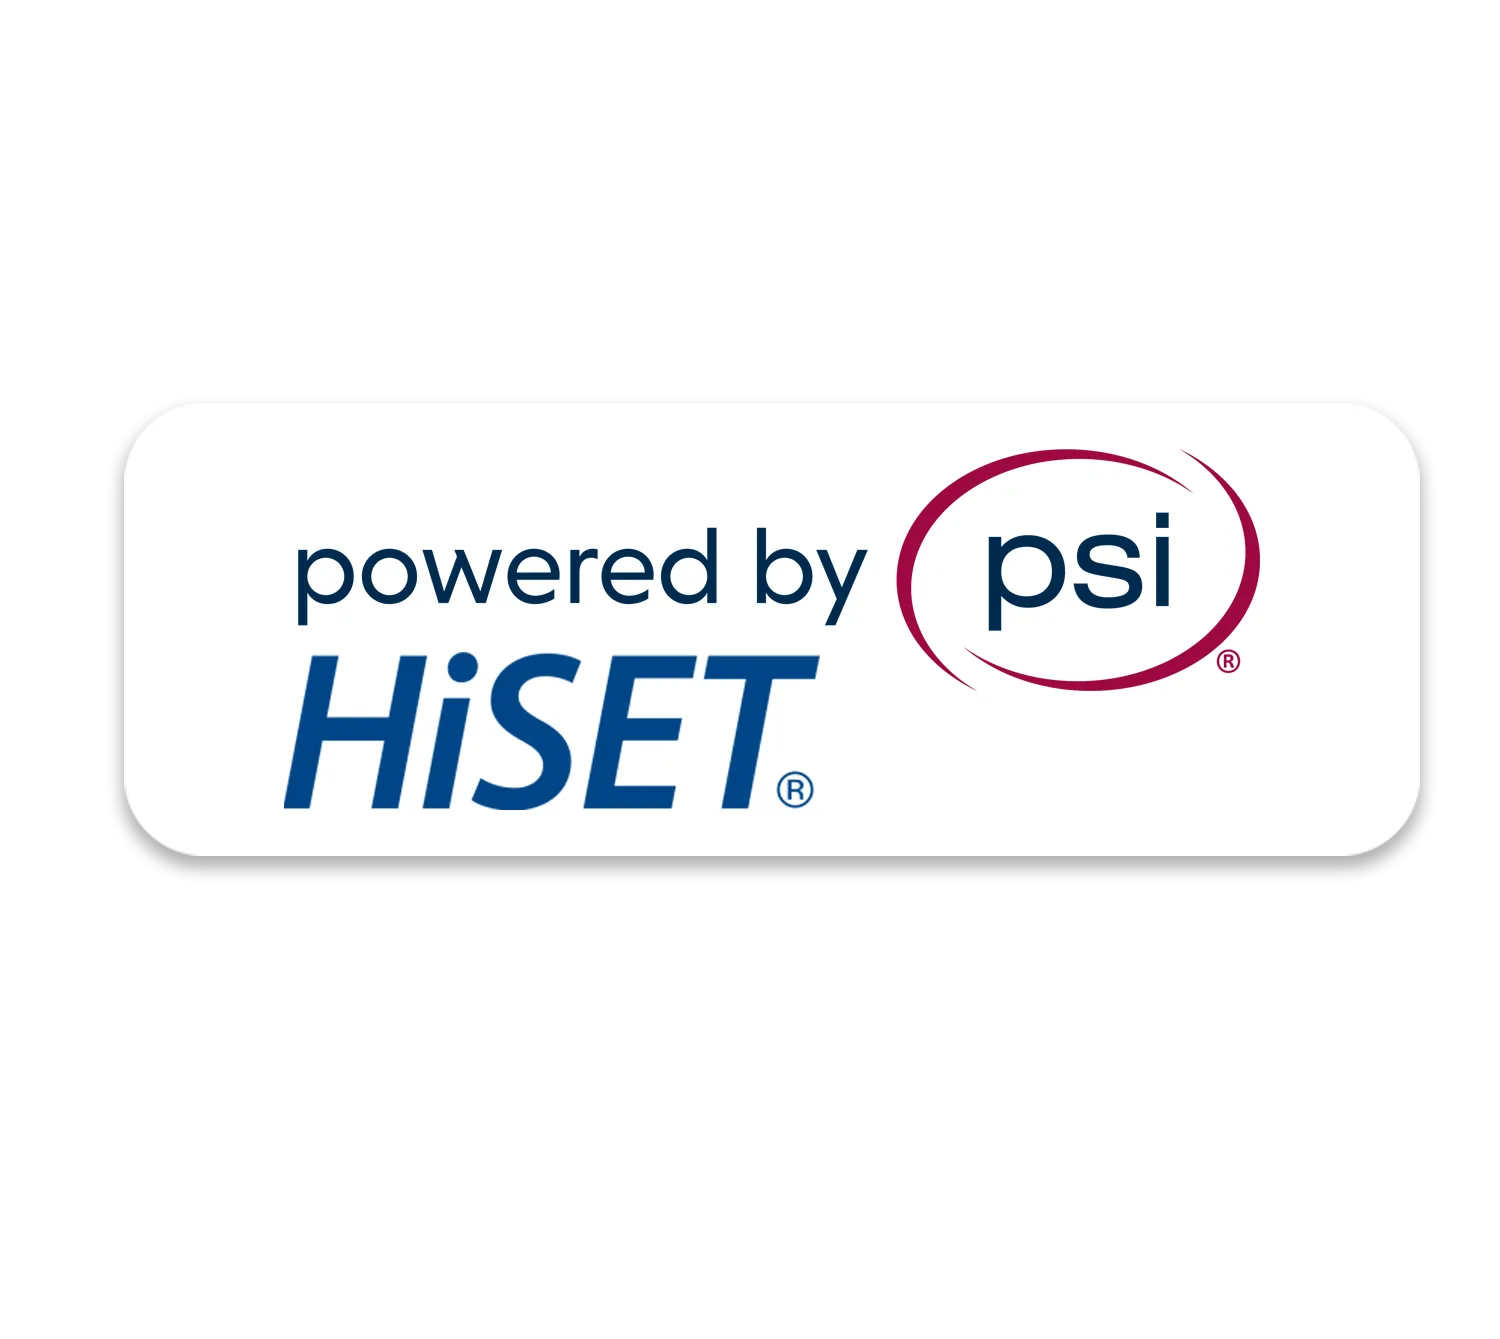 ALIGNED TO THE OFFICIAL HiSET® EXAM